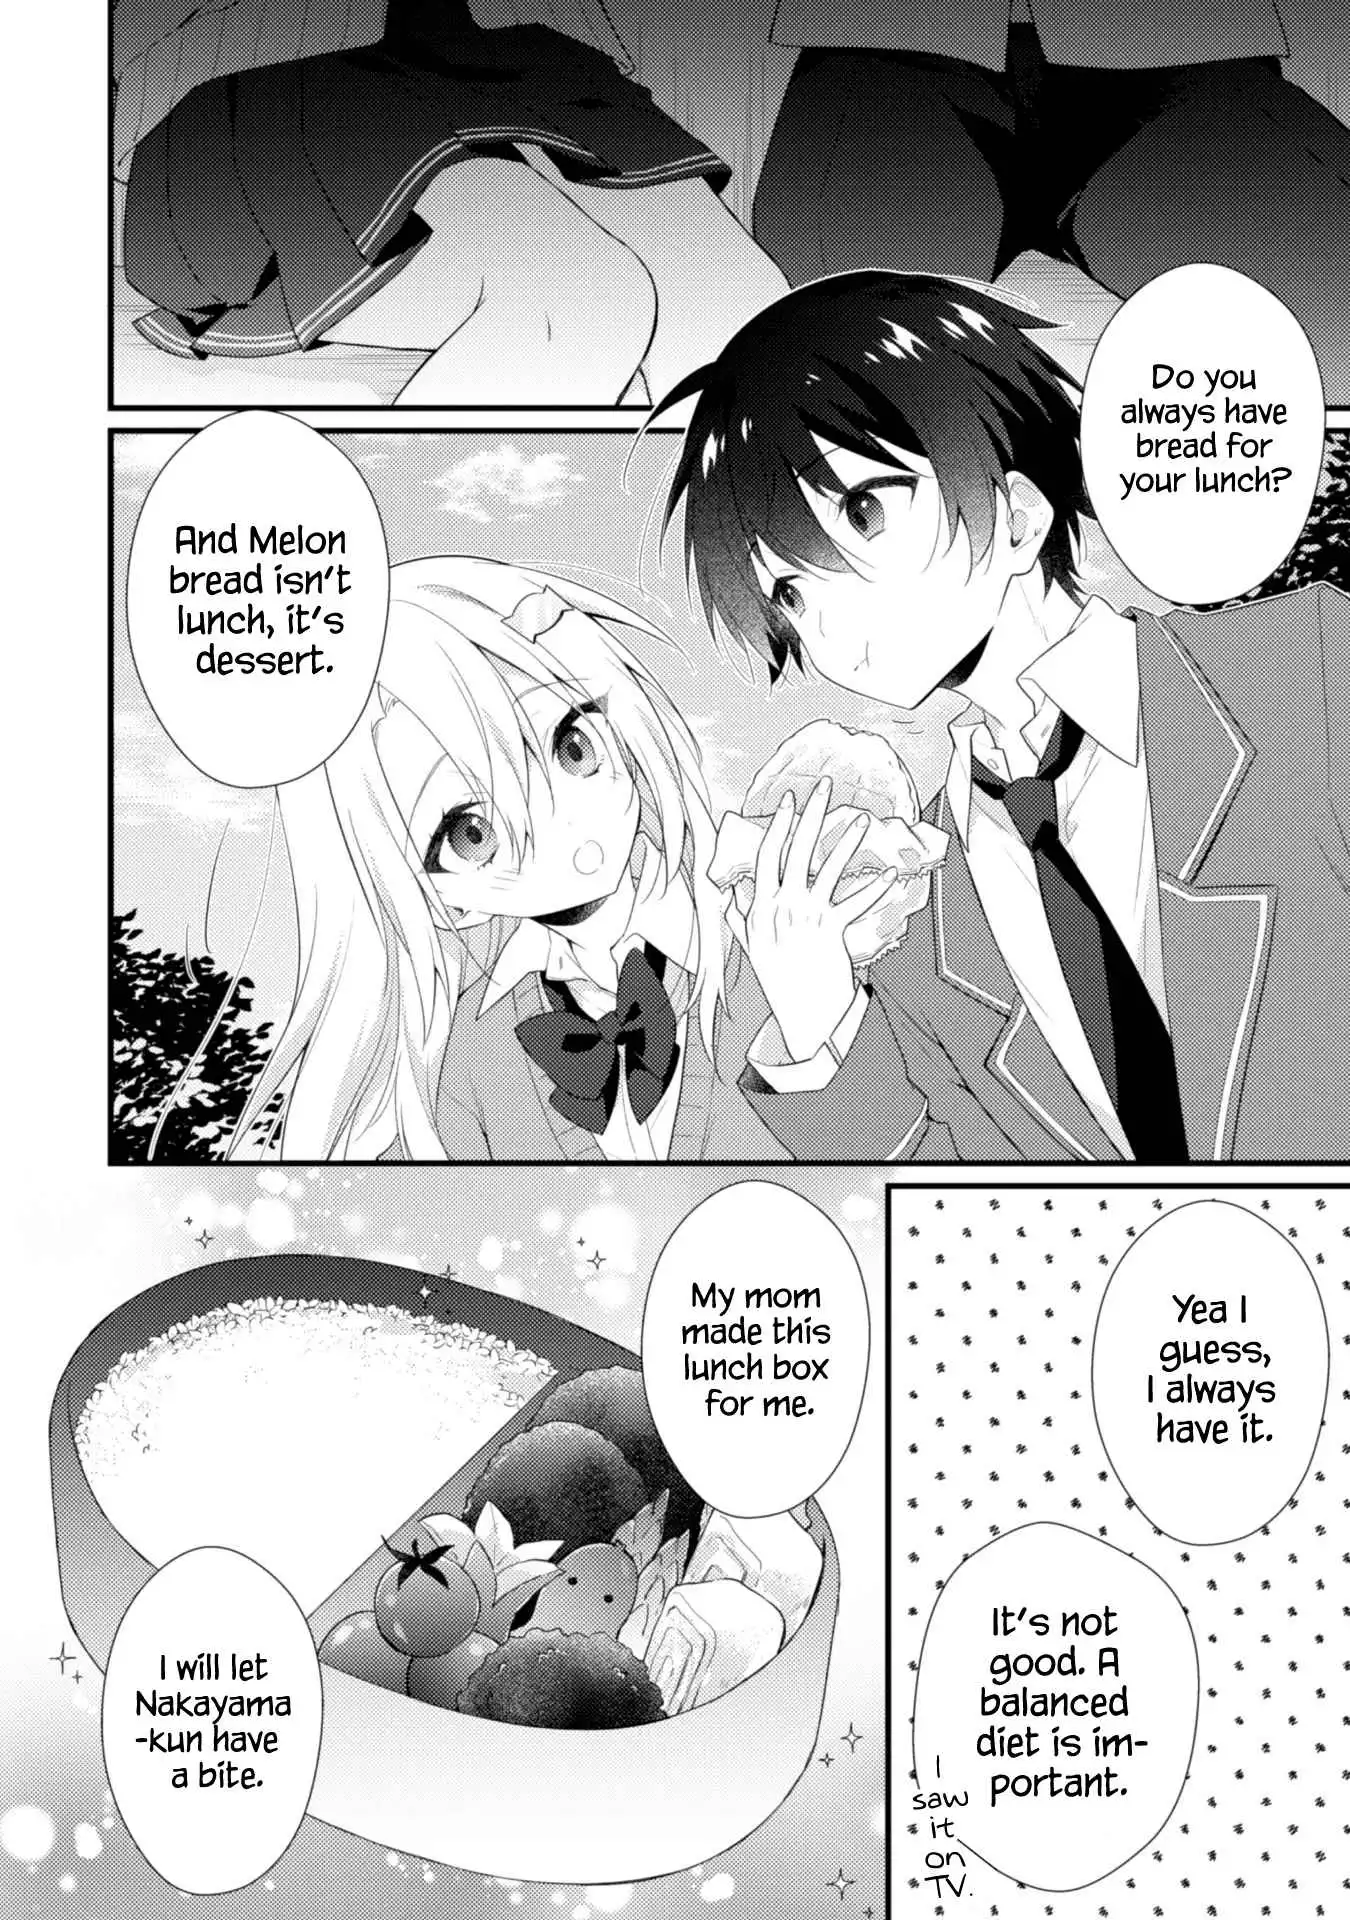 Shimotsuki-san Likes the Mob ~This Shy Girl is Only Sweet Towards Me~ Chapter 2.1